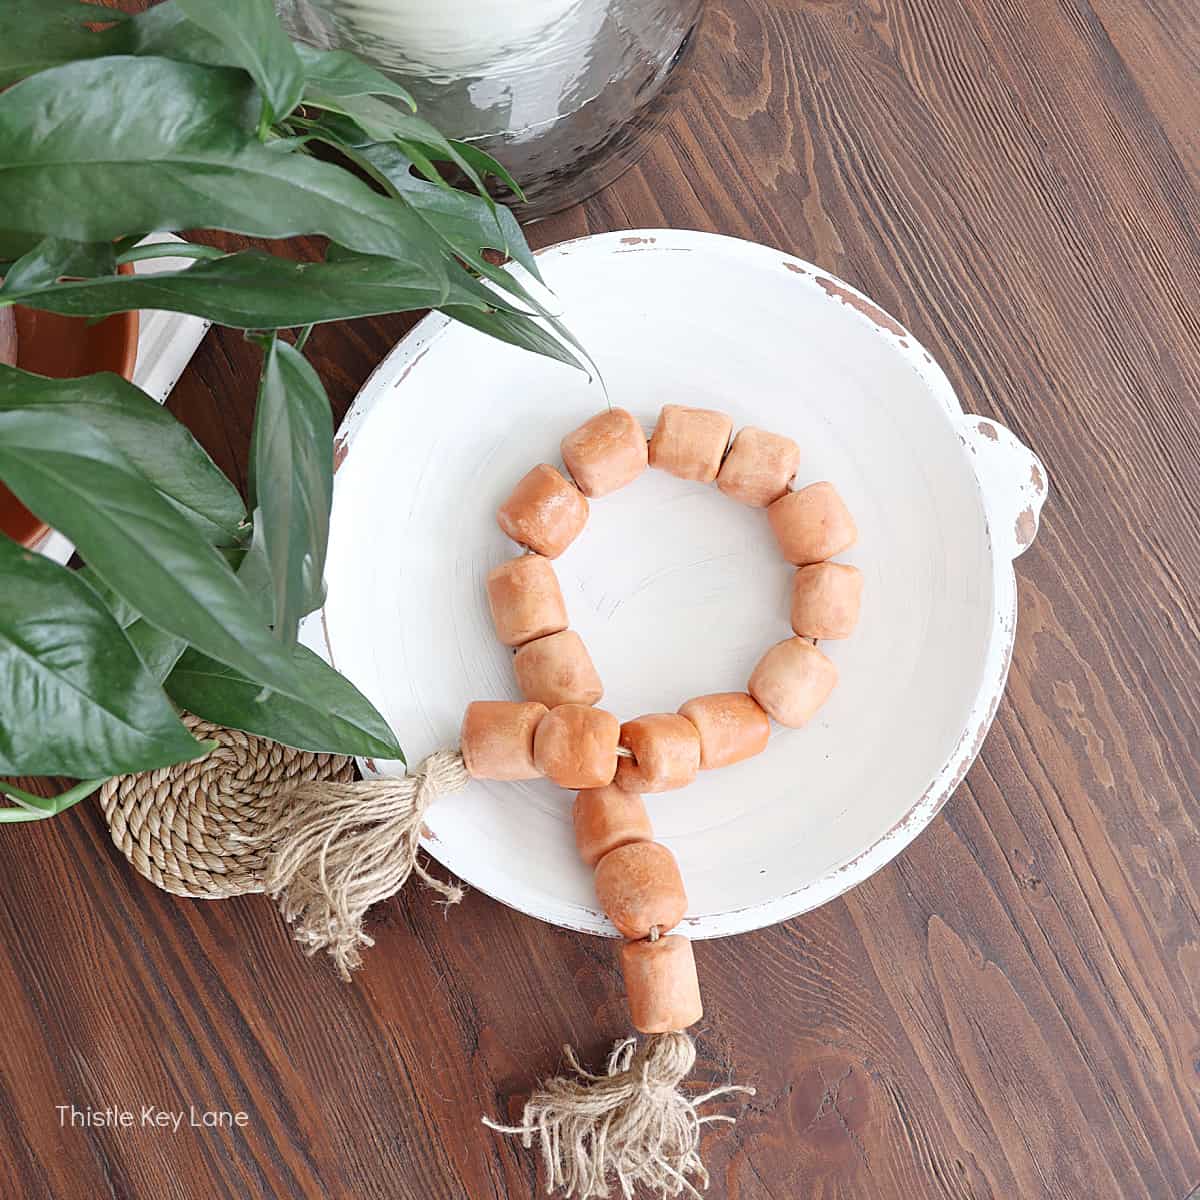 How To Make An Air Dry Clay Garland - Thistle Key Lane